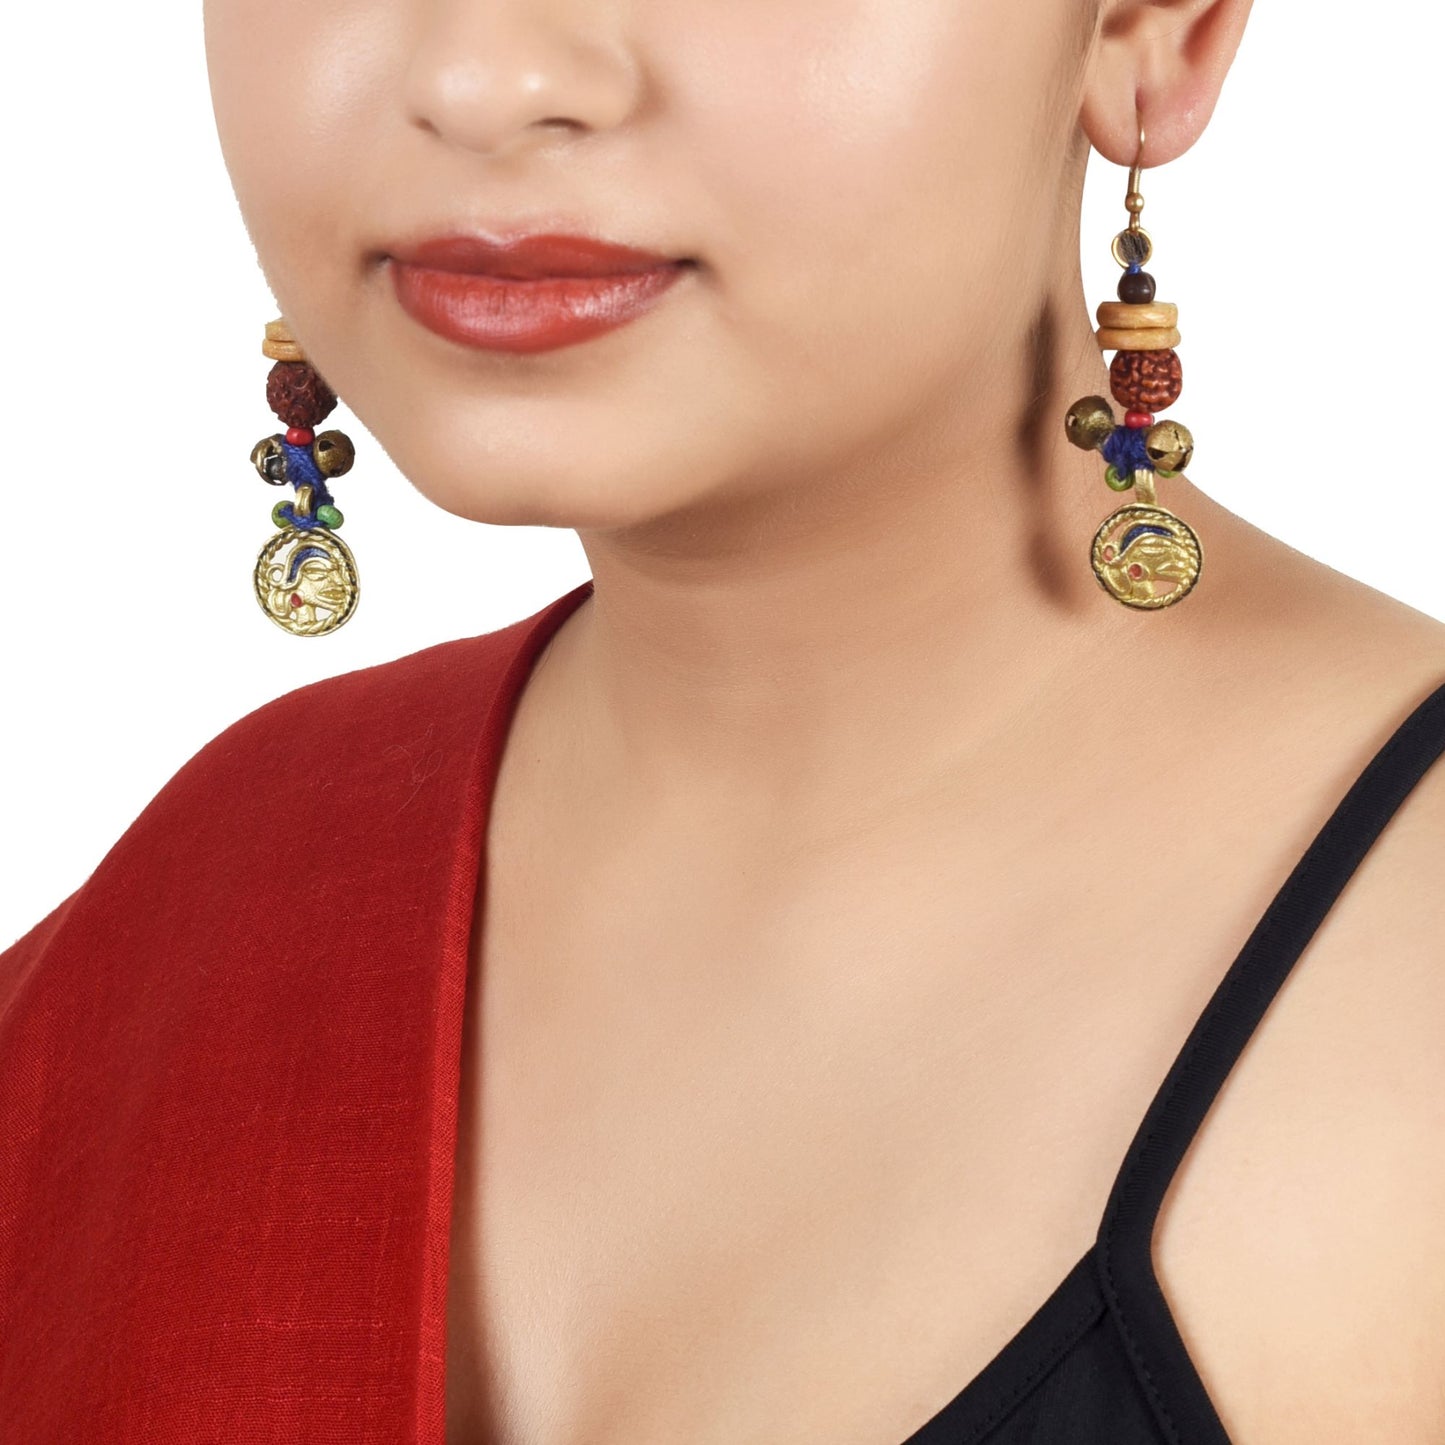 The Royal Parade Handcrafted Tribal Earrings